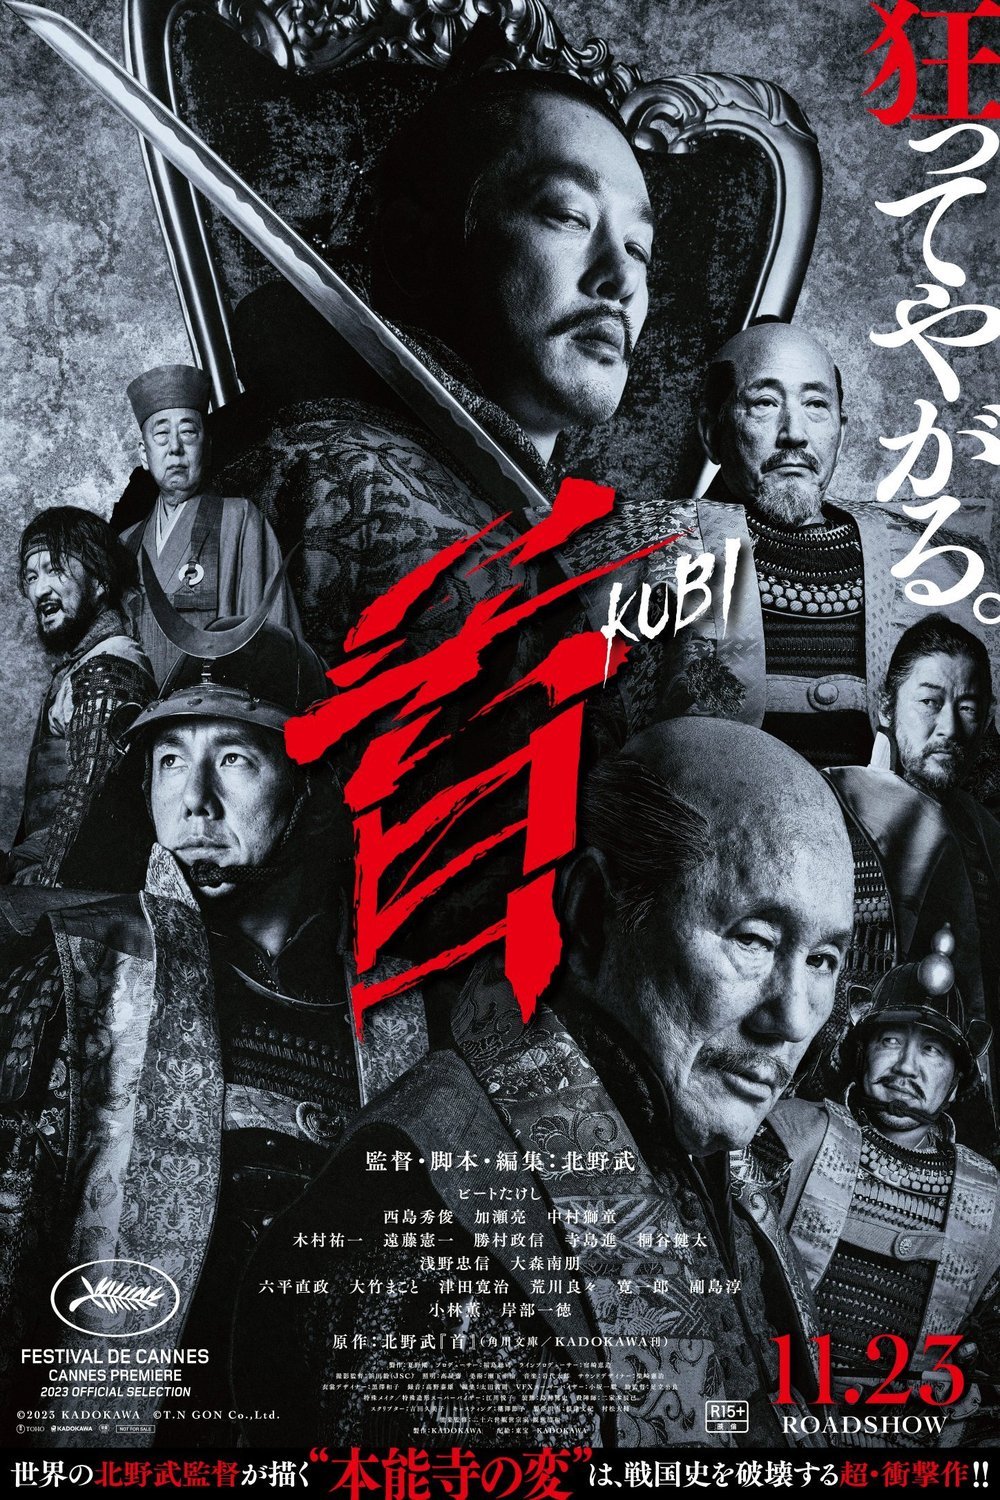 Japanese poster of the movie Kubi